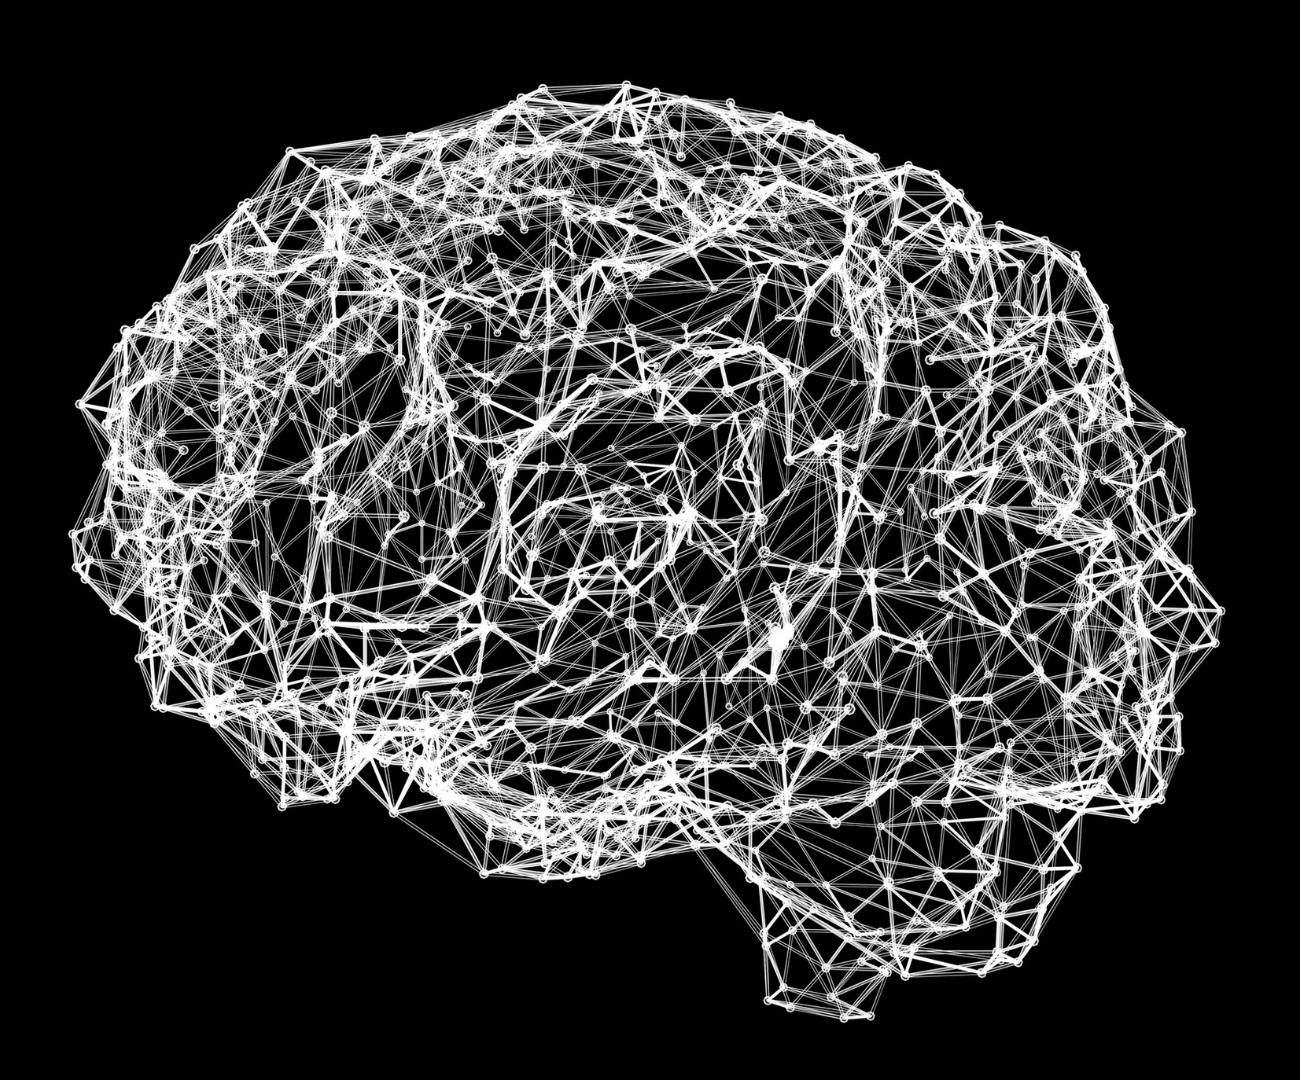 WHAT ARE NEURAL NETWORKS?